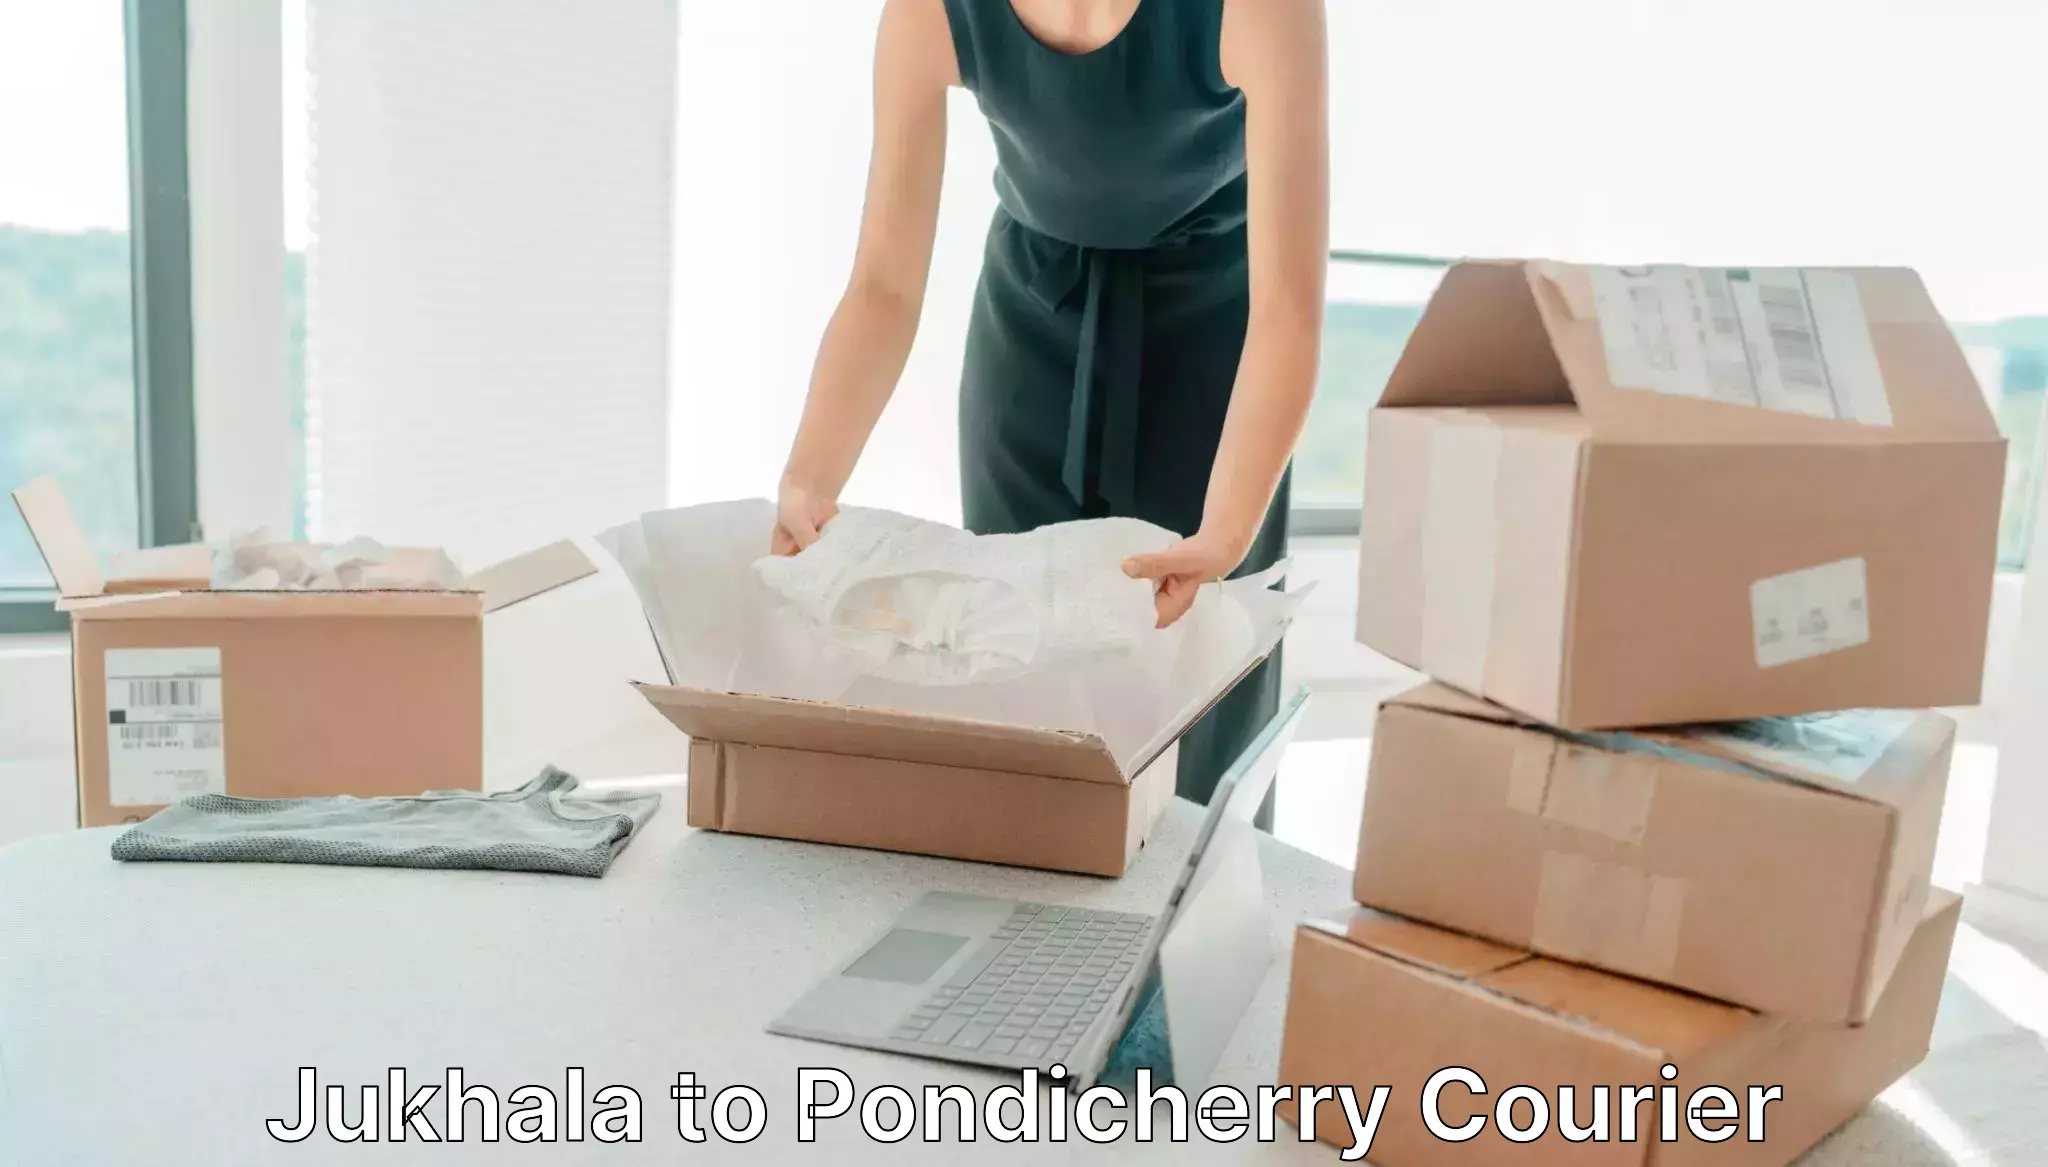 Full-service courier options Jukhala to Pondicherry